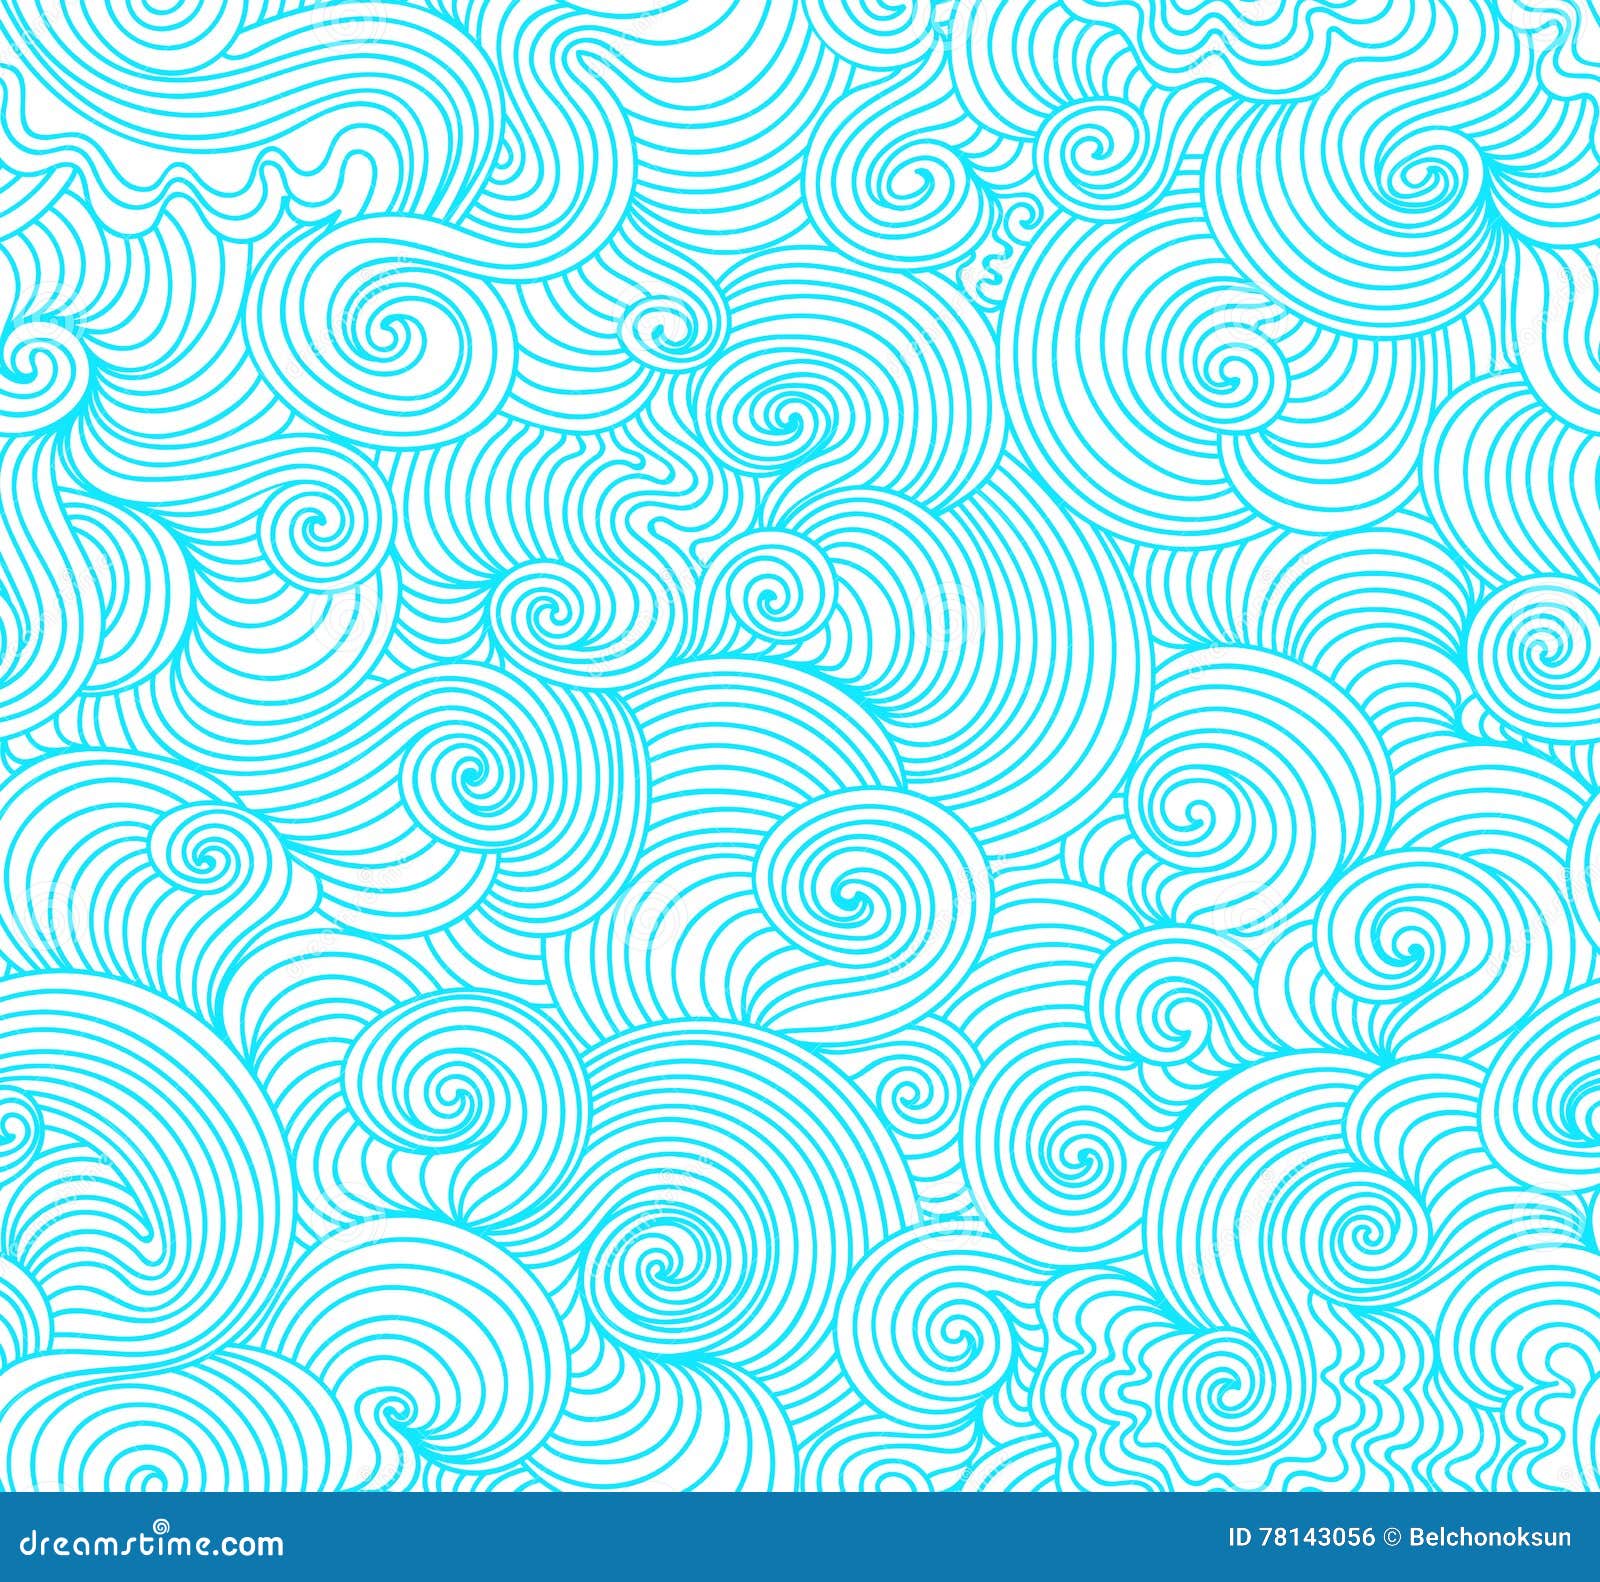 Abstract Vector Endless Seamless Texture with Wavy Curling Lines ...